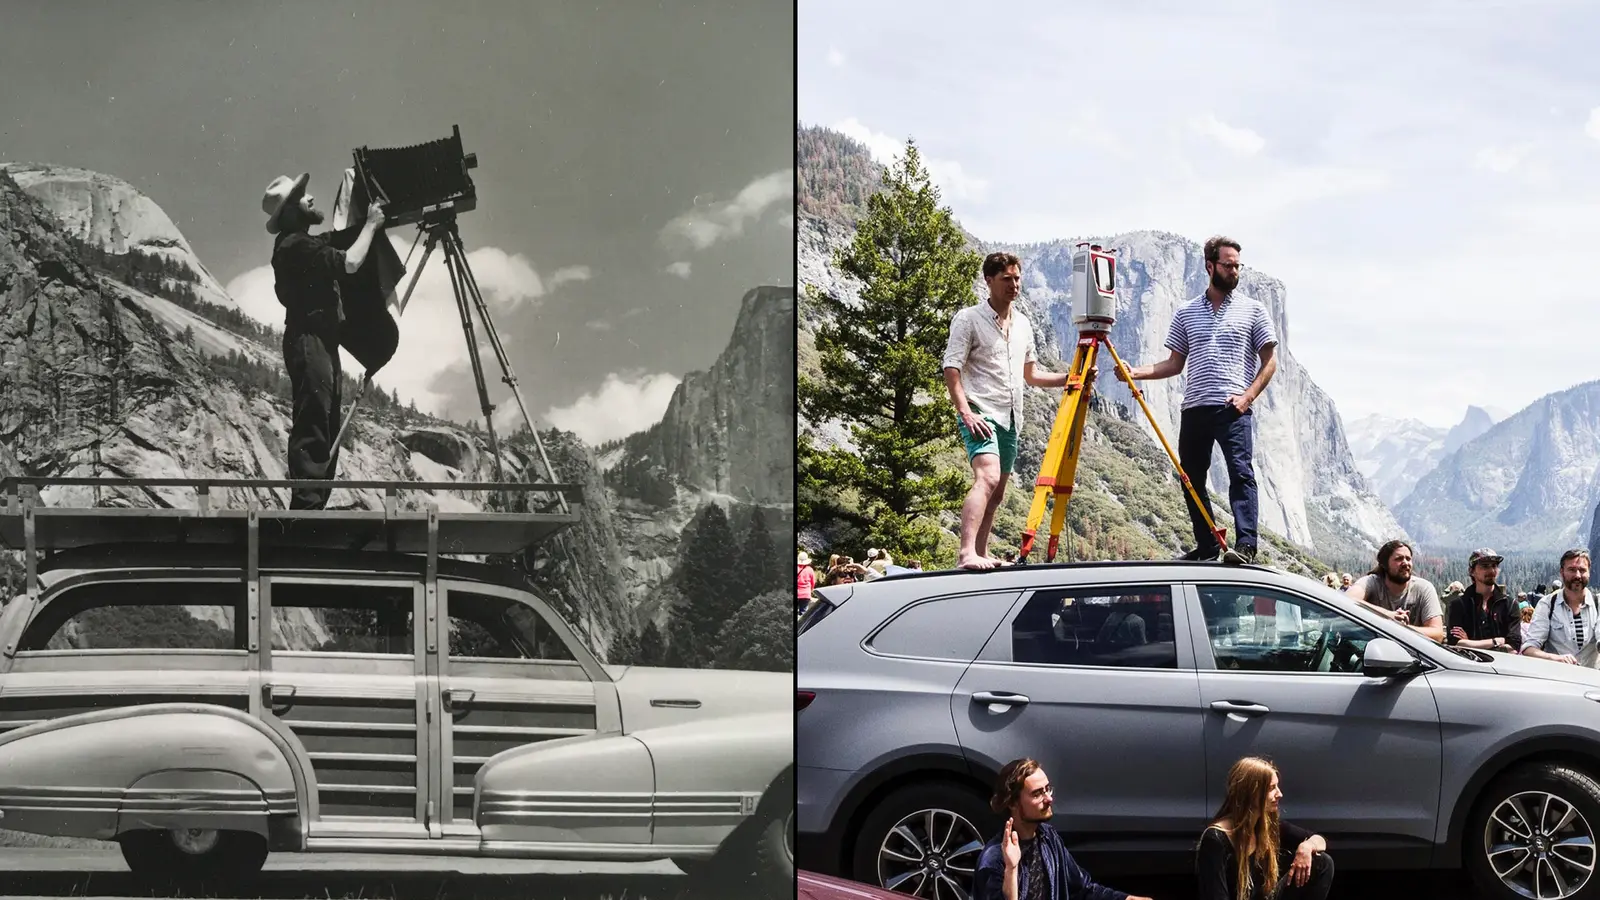 Left: Ansel Adams photographing in Yosemite atop his Woodie station wagon, 1935, photo by Cedric Wright. Right: Matthew Shaw and William Trossell of ScanLAB Projects in May, 2016, with terrestrial laser scanners, atop their modified Hyundai Santa Fe.